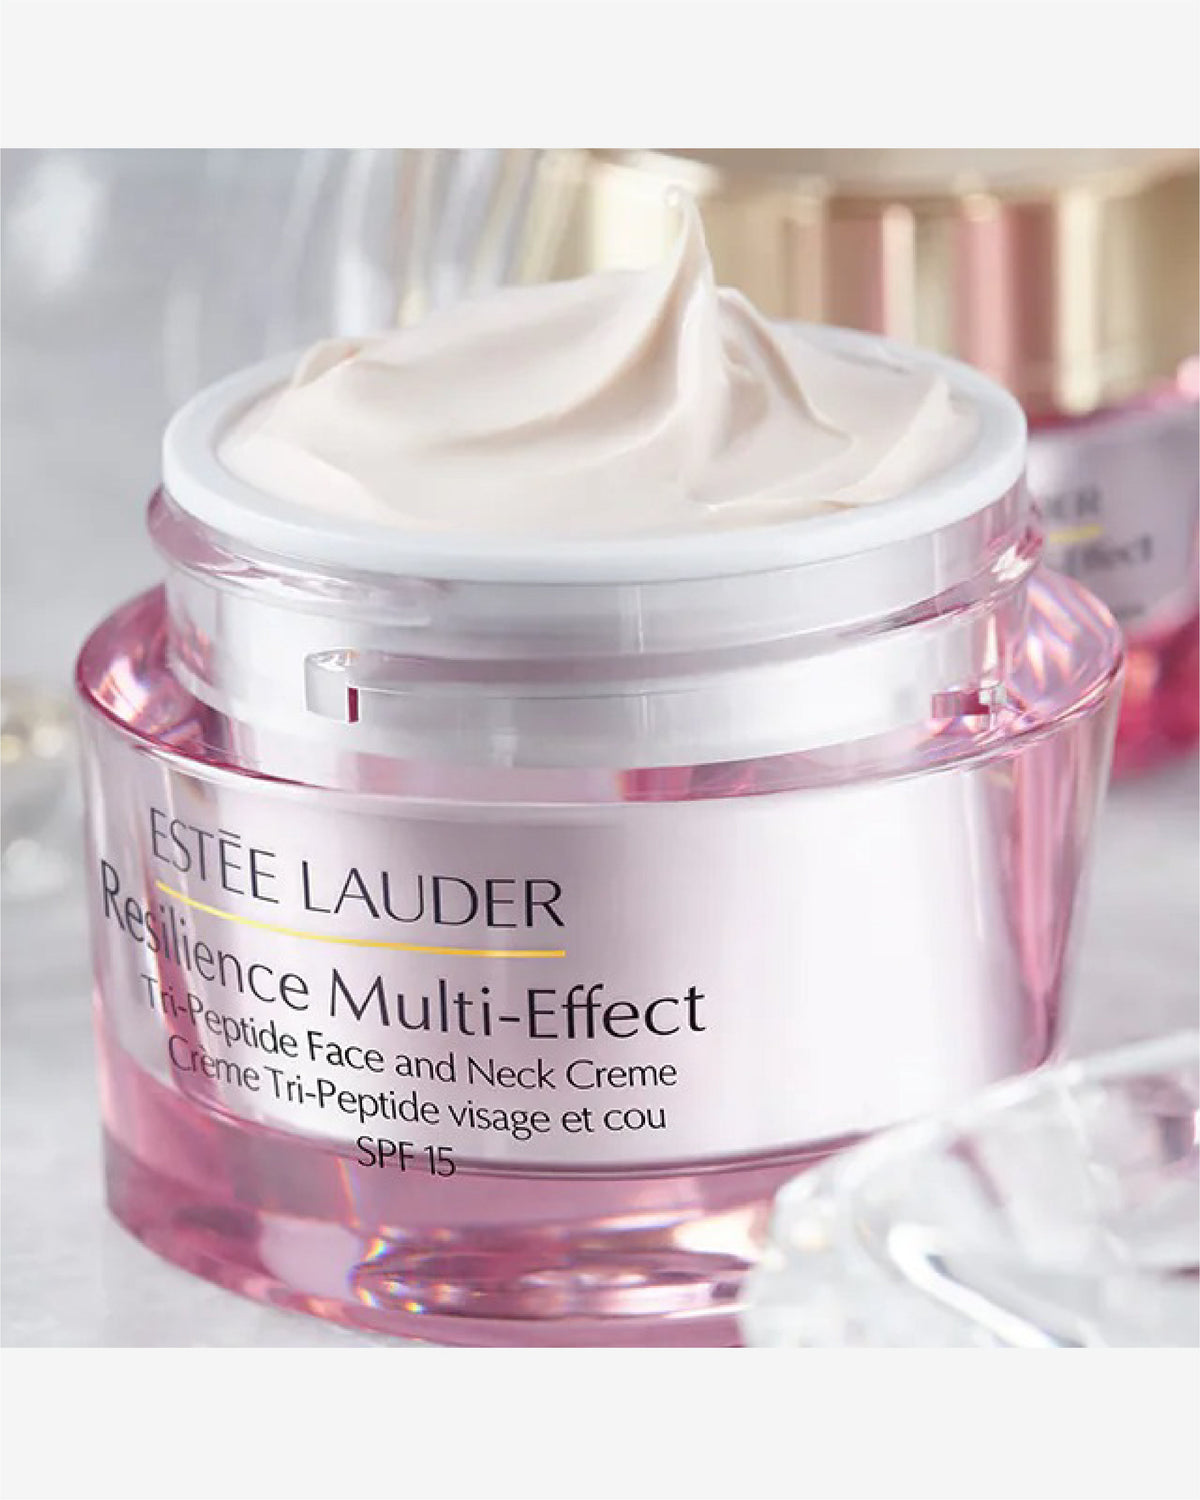 Resilience Multi-Effect Tri-Peptide Face &amp; Neck Creme Spf15